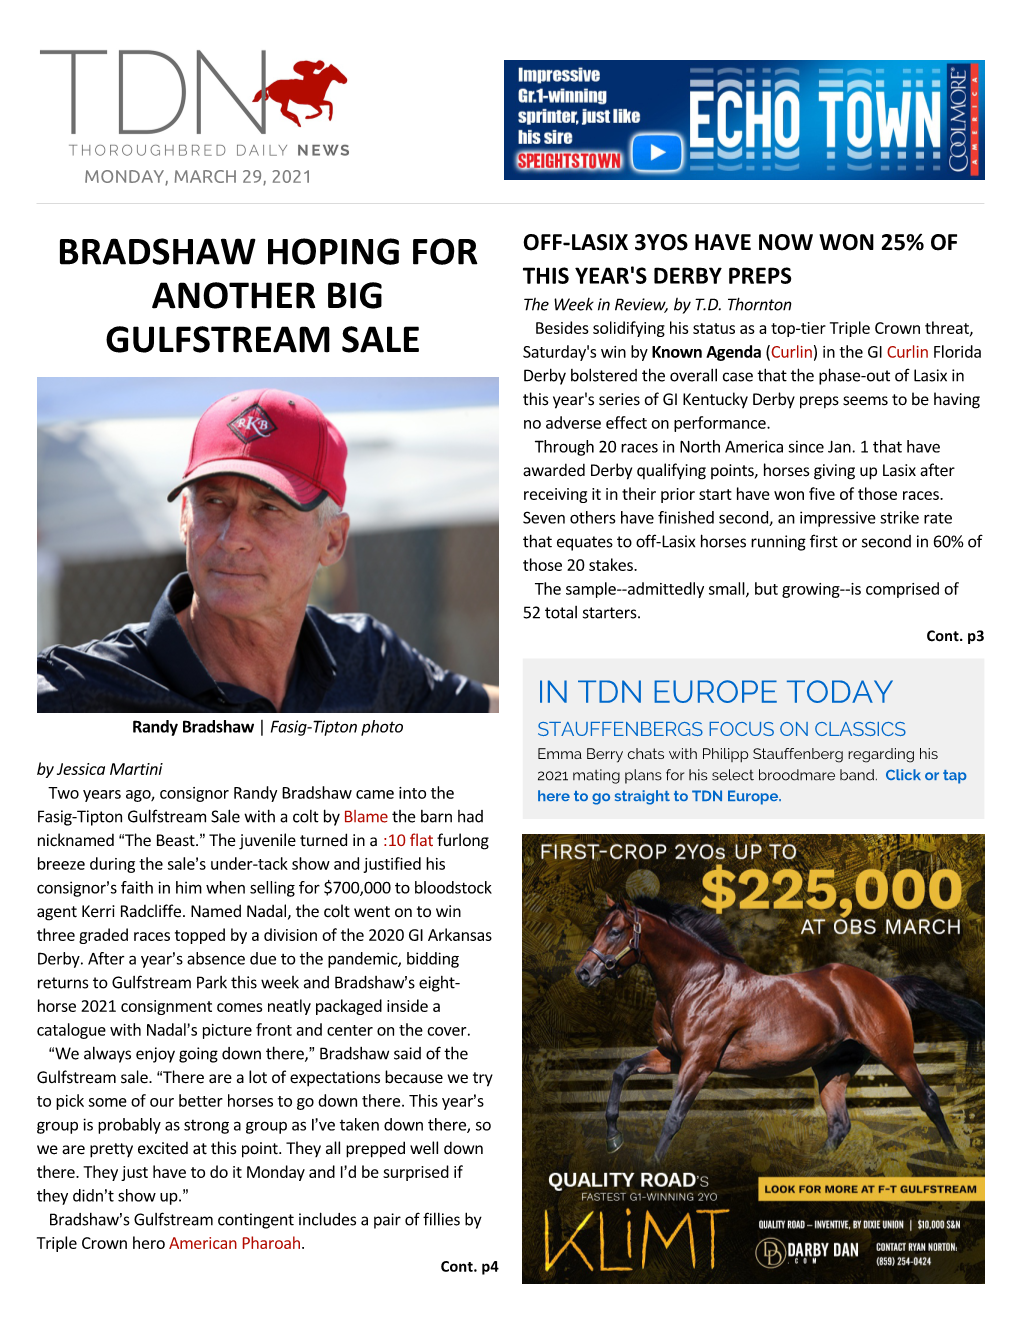 Bradshaw Hoping for Another Big Gulfstream Sale